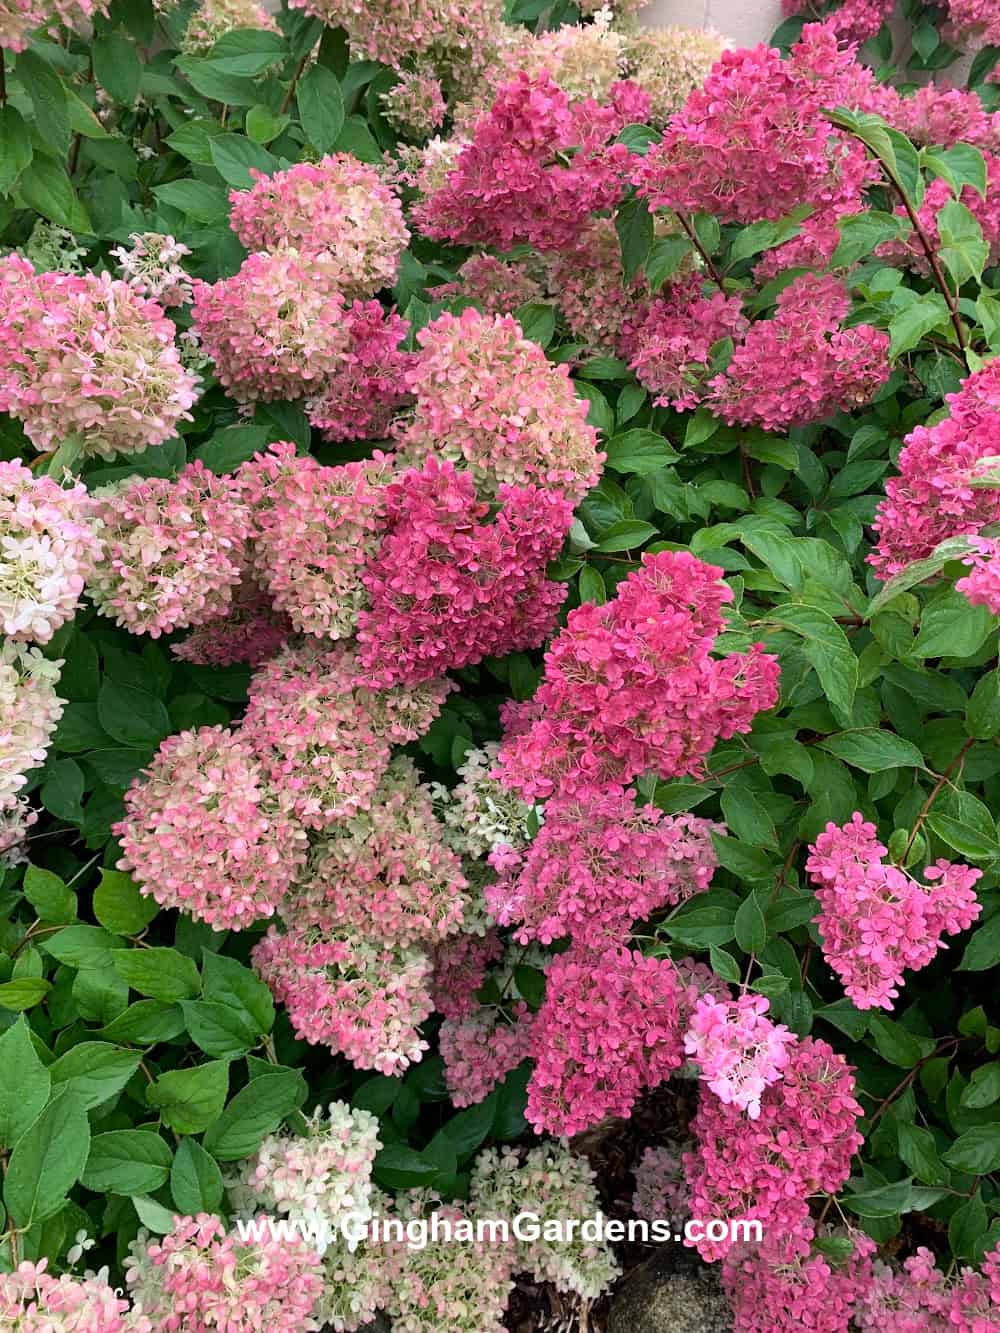 Shade of pink hydrangea plant demonstrating color combinations in a flower garden.